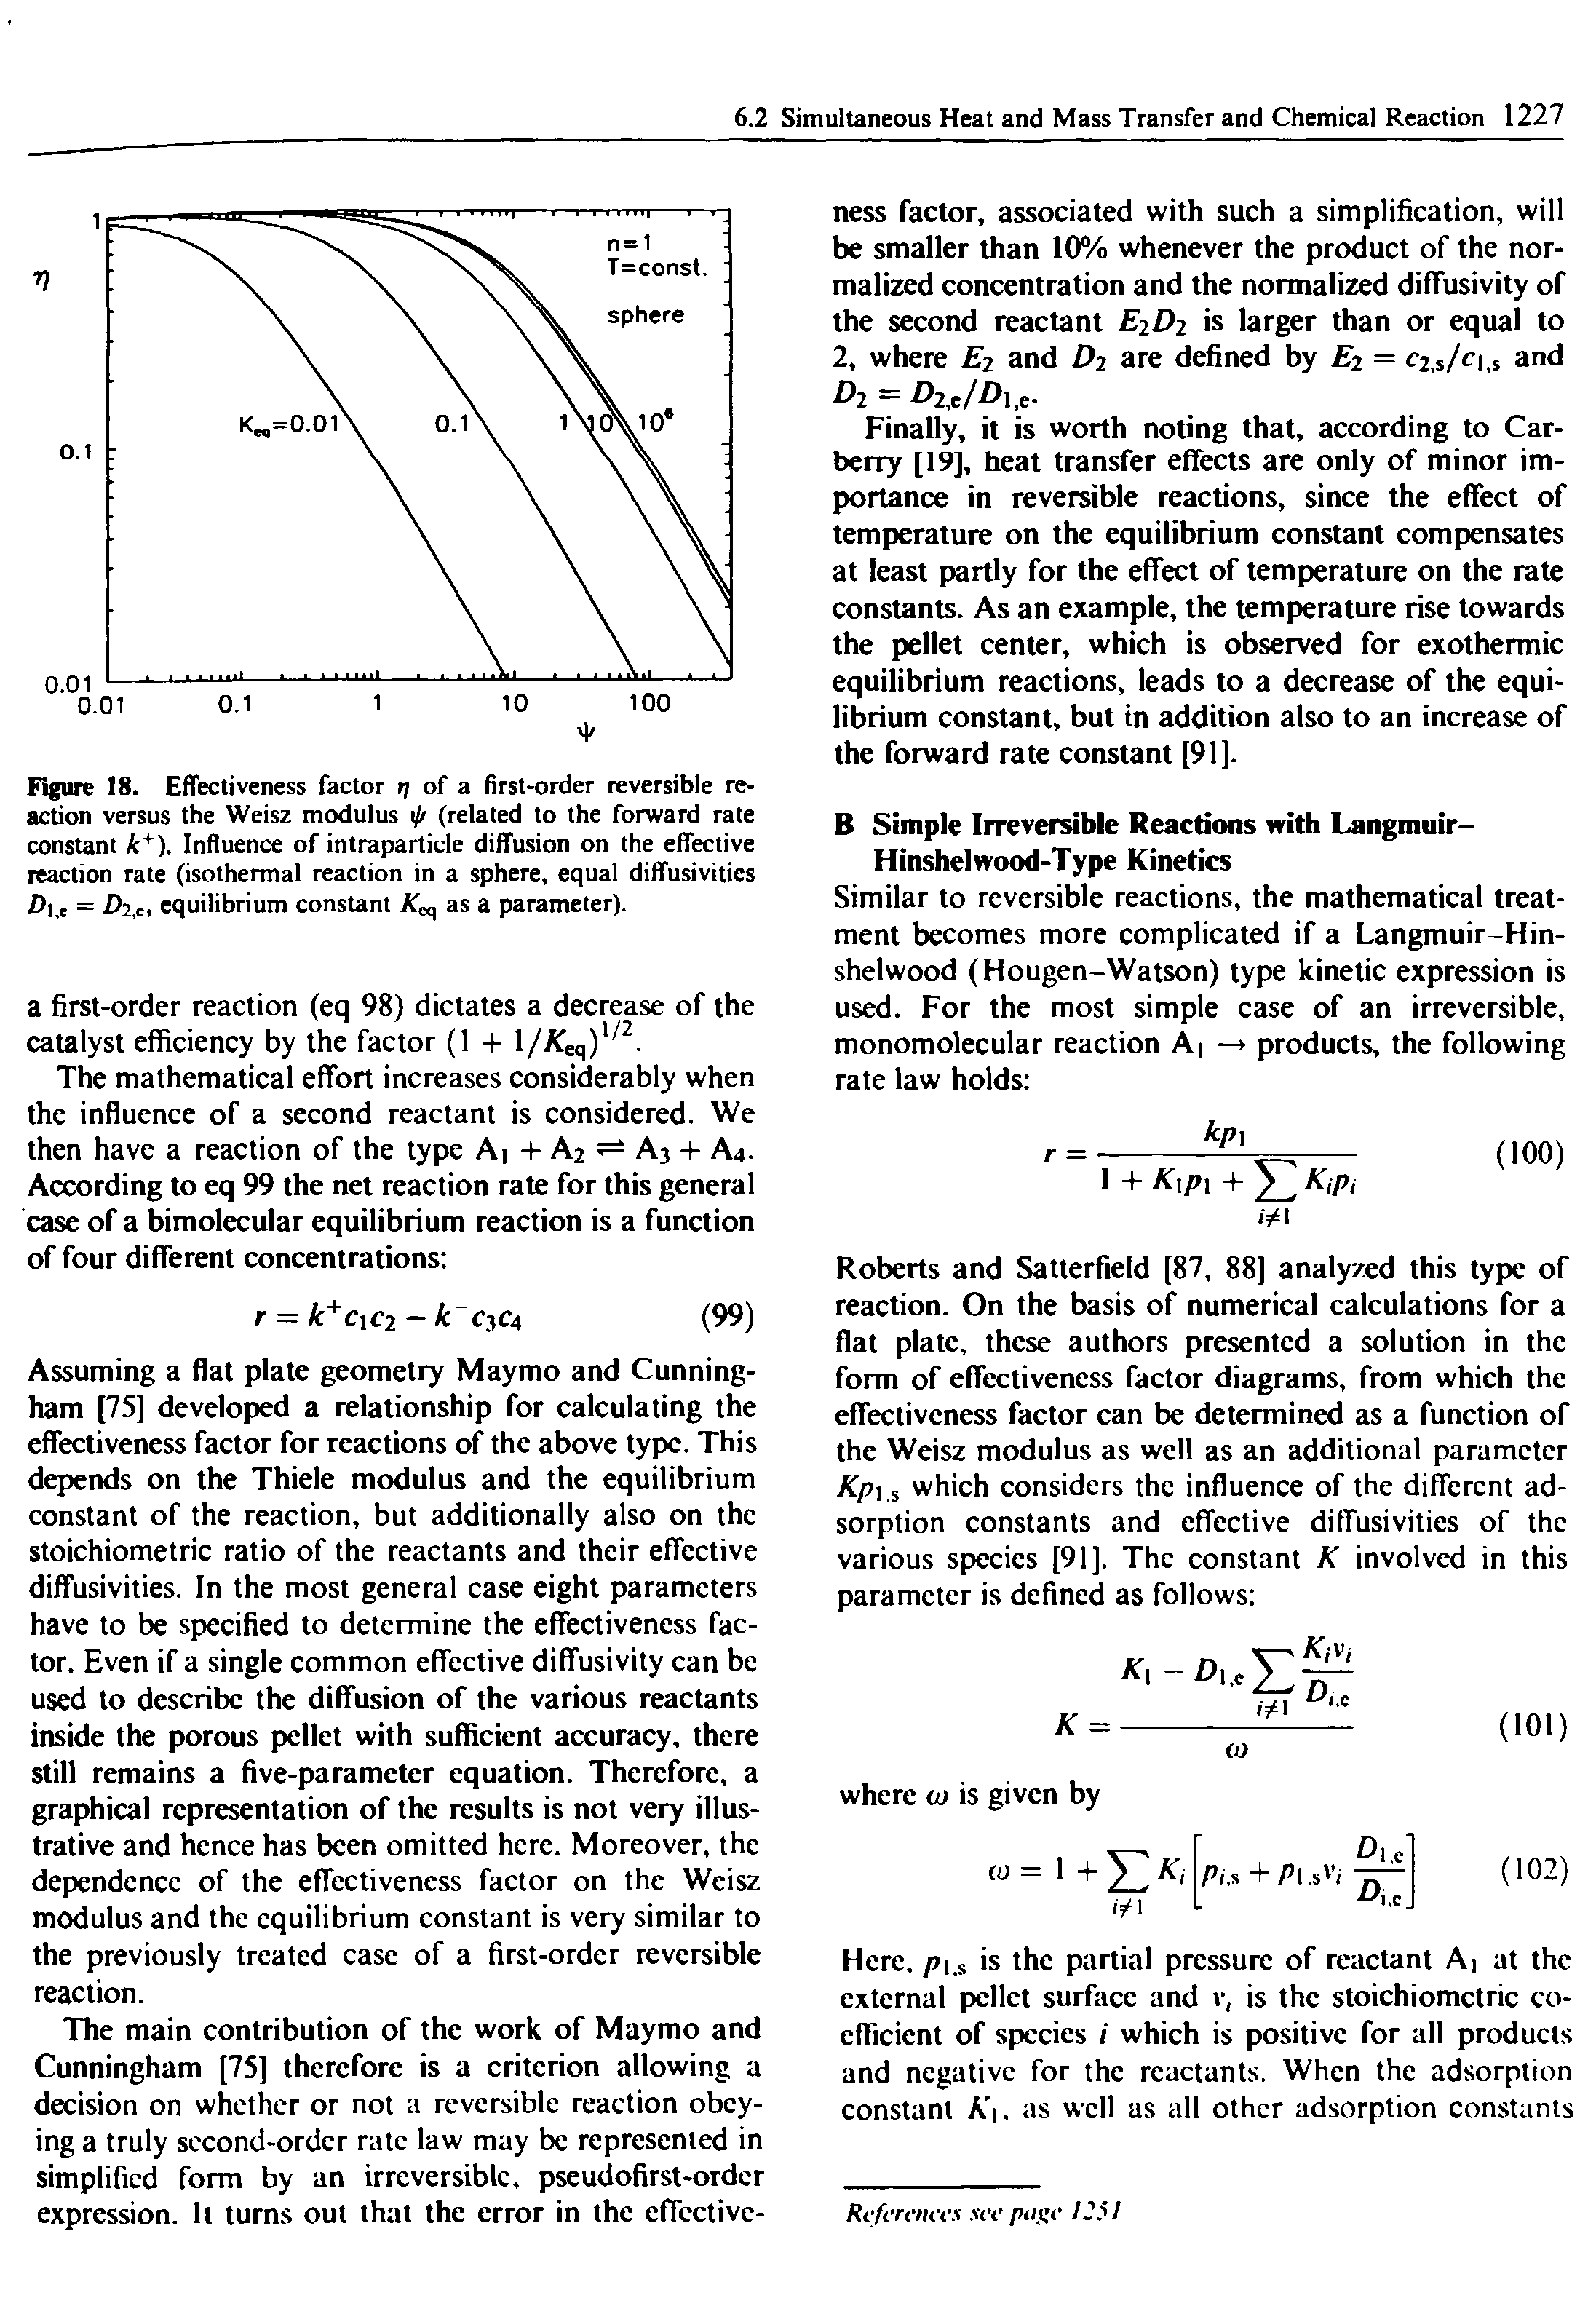 Figure 18. Effectiveness factor rj of a first-order reversible reaction versus the Weisz modulus ip (related to the forward rate constant k+). Influence of intraparticle diffusion on the effective reaction rate (isothermal reaction in a sphere, equal diffusivitics i,e = Die, equilibrium constant as a parameter).